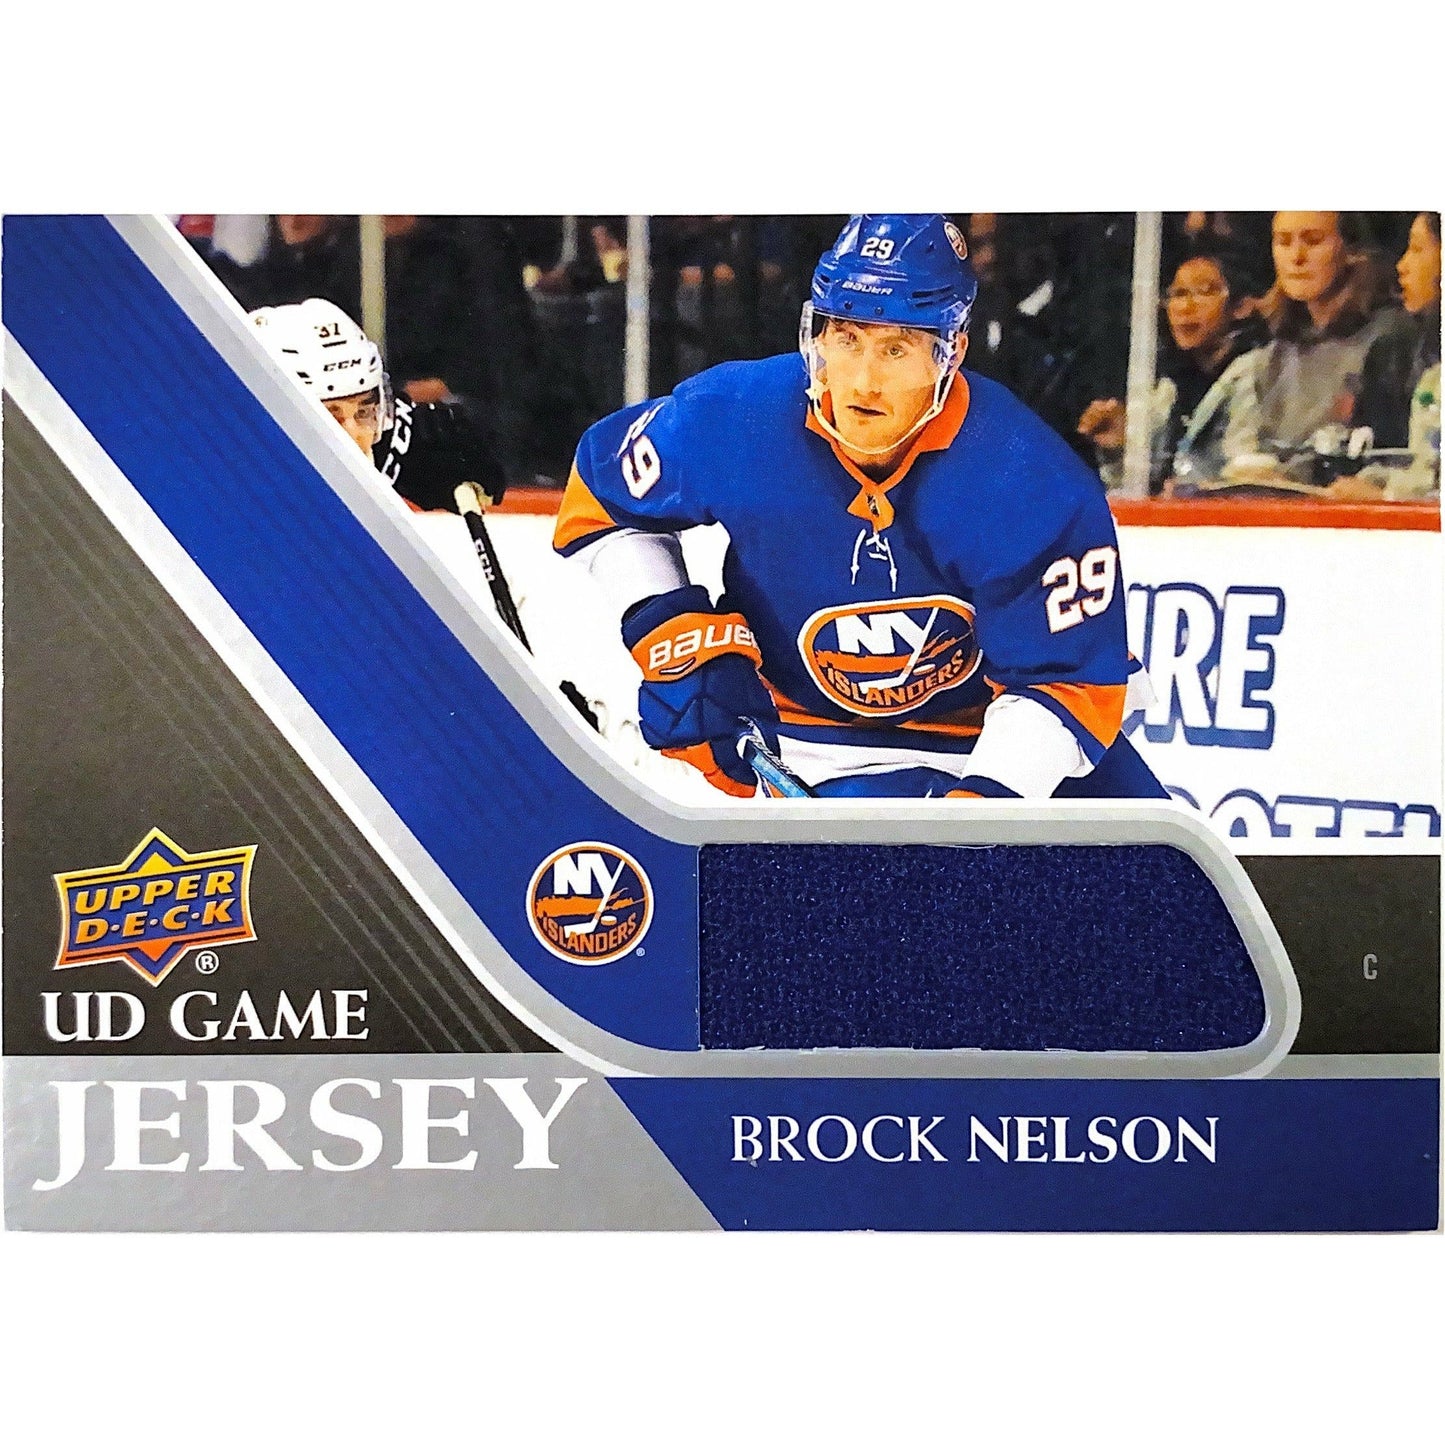 2020-21 Upper Deck Series 1 Brock Nelson UD Game Jersey